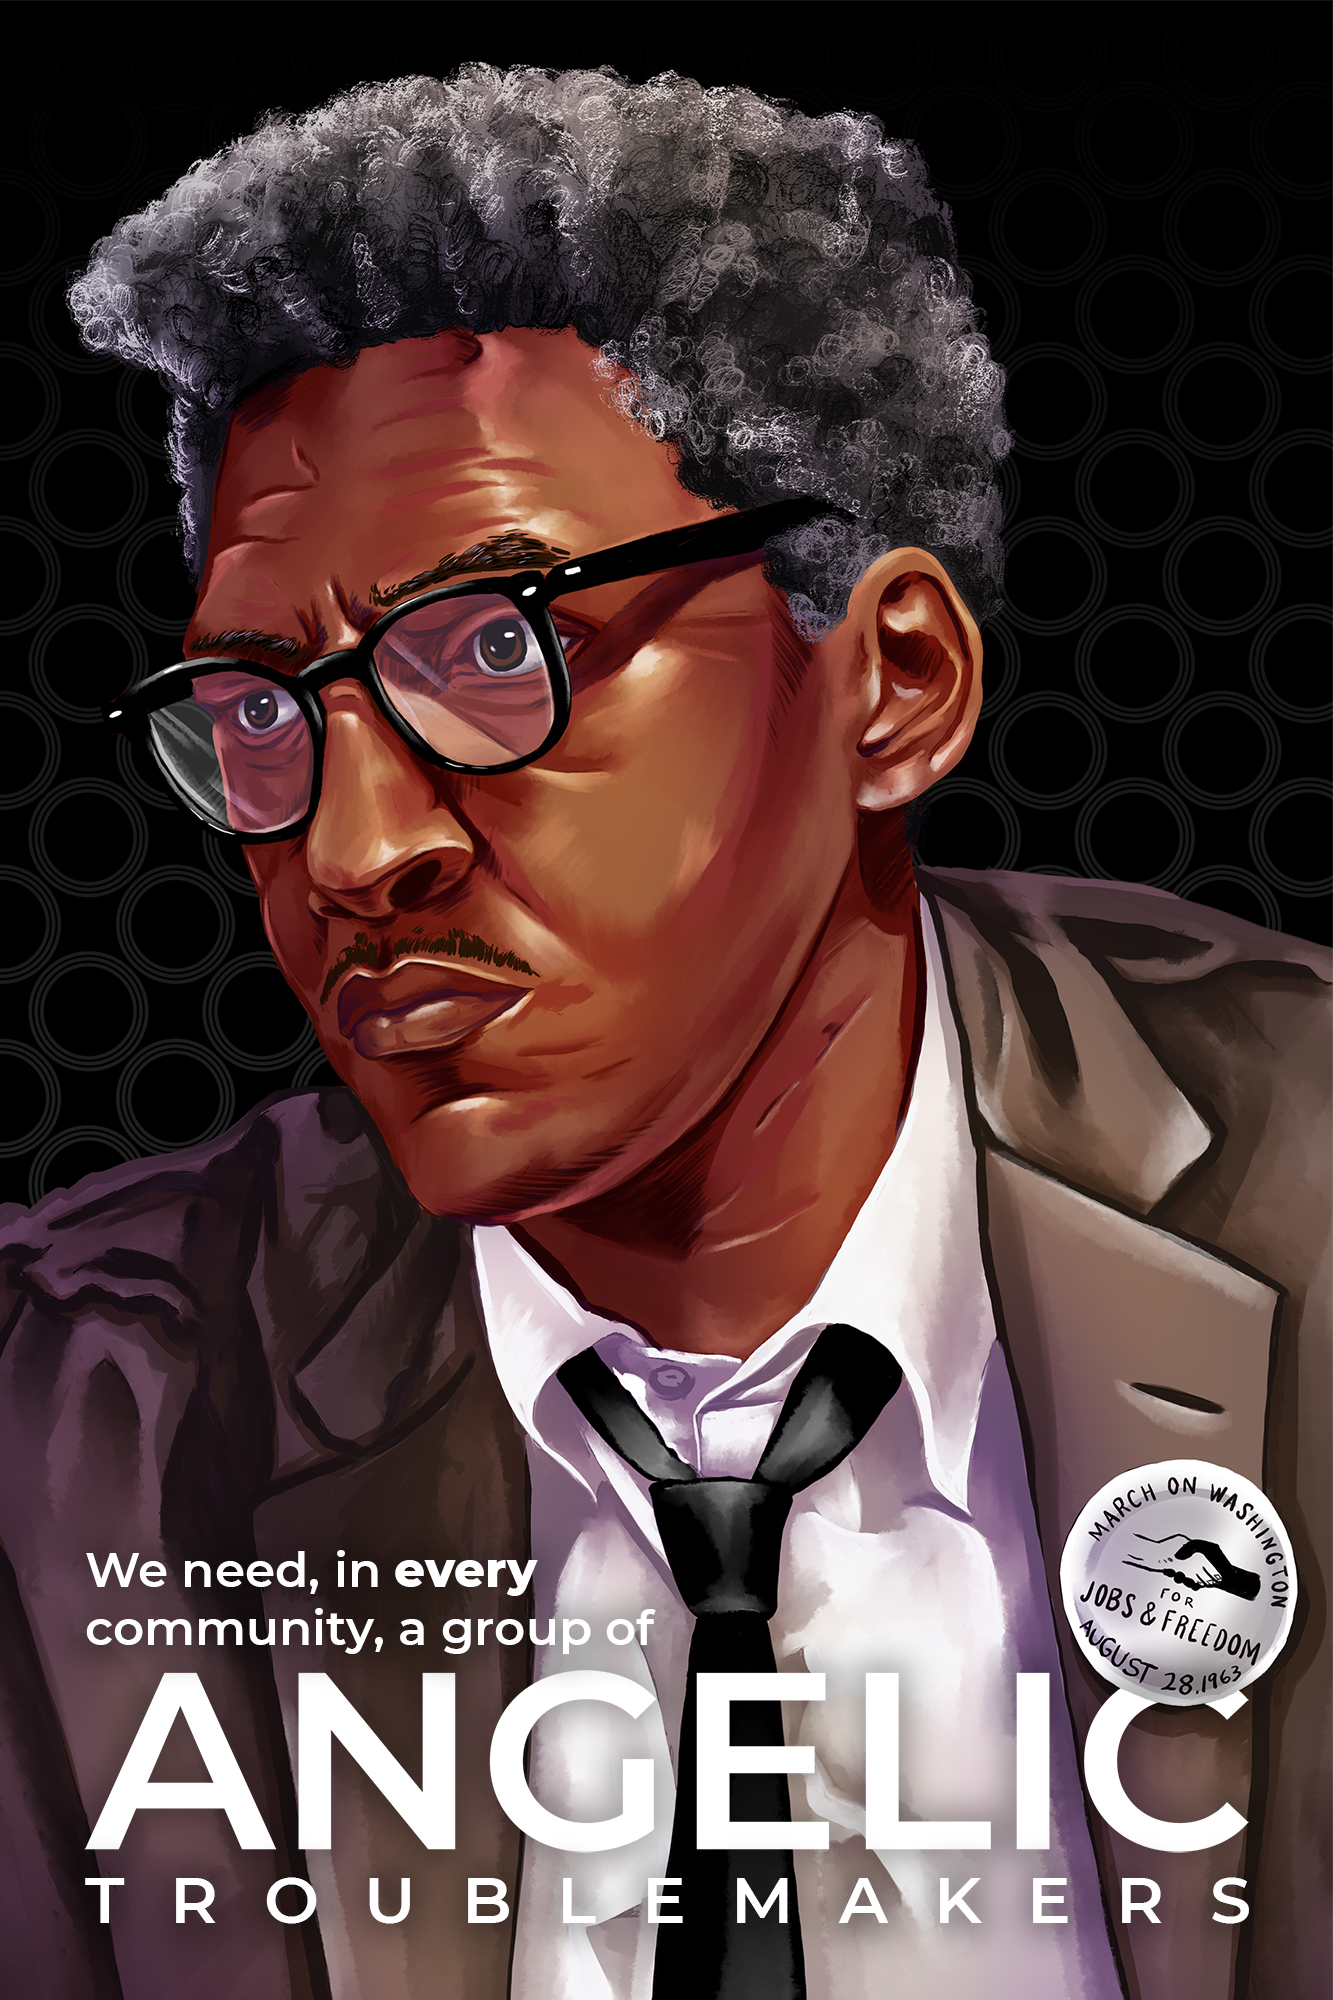 A painted portrait of Bayard Rustin, organizer of the March on Washington, painted by Sarah Black, with a quote on it in bright white text, "We need, in every community, a group of angelic troublemakers."